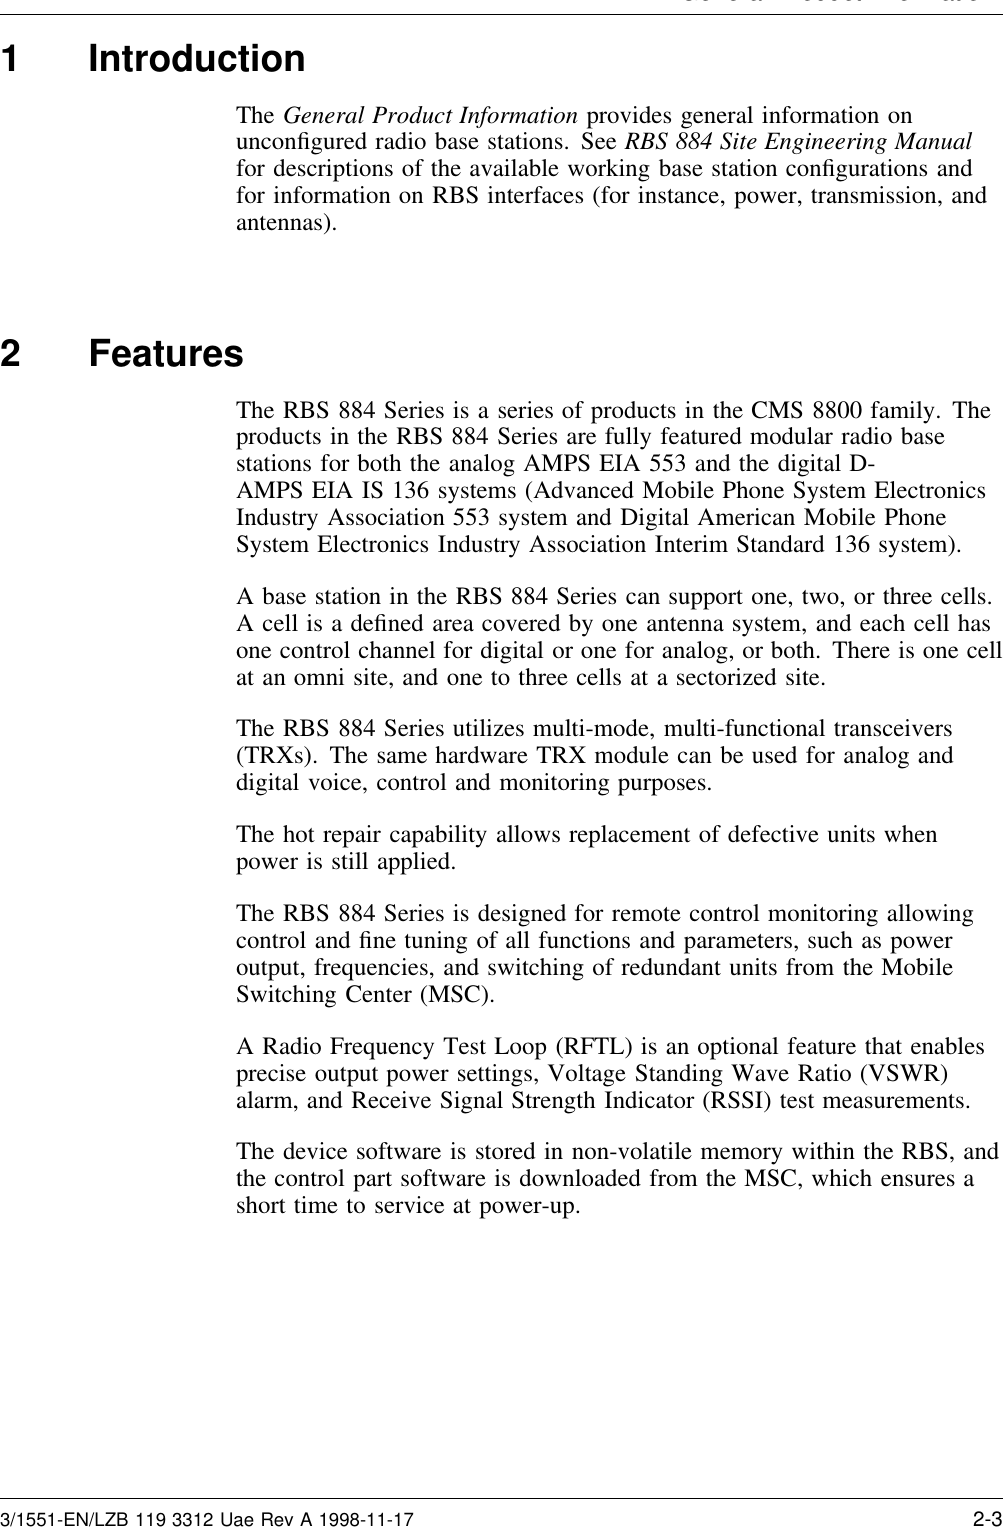 General Product Information1 IntroductionThe General Product Information provides general information onunconﬁgured radio base stations. See RBS 884 Site Engineering Manualfor descriptions of the available working base station conﬁgurations andfor information on RBS interfaces (for instance, power, transmission, andantennas).2 FeaturesThe RBS 884 Series is a series of products in the CMS 8800 family. Theproducts in the RBS 884 Series are fully featured modular radio basestations for both the analog AMPS EIA 553 and the digital D-AMPS EIA IS 136 systems (Advanced Mobile Phone System ElectronicsIndustry Association 553 system and Digital American Mobile PhoneSystem Electronics Industry Association Interim Standard 136 system).A base station in the RBS 884 Series can support one, two, or three cells.A cell is a deﬁned area covered by one antenna system, and each cell hasone control channel for digital or one for analog, or both. There is one cellat an omni site, and one to three cells at a sectorized site.The RBS 884 Series utilizes multi-mode, multi-functional transceivers(TRXs). The same hardware TRX module can be used for analog anddigital voice, control and monitoring purposes.The hot repair capability allows replacement of defective units whenpower is still applied.The RBS 884 Series is designed for remote control monitoring allowingcontrol and ﬁne tuning of all functions and parameters, such as poweroutput, frequencies, and switching of redundant units from the MobileSwitching Center (MSC).A Radio Frequency Test Loop (RFTL) is an optional feature that enablesprecise output power settings, Voltage Standing Wave Ratio (VSWR)alarm, and Receive Signal Strength Indicator (RSSI) test measurements.The device software is stored in non-volatile memory within the RBS, andthe control part software is downloaded from the MSC, which ensures ashort time to service at power-up.3/1551-EN/LZB 119 3312 Uae Rev A 1998-11-17 2-3